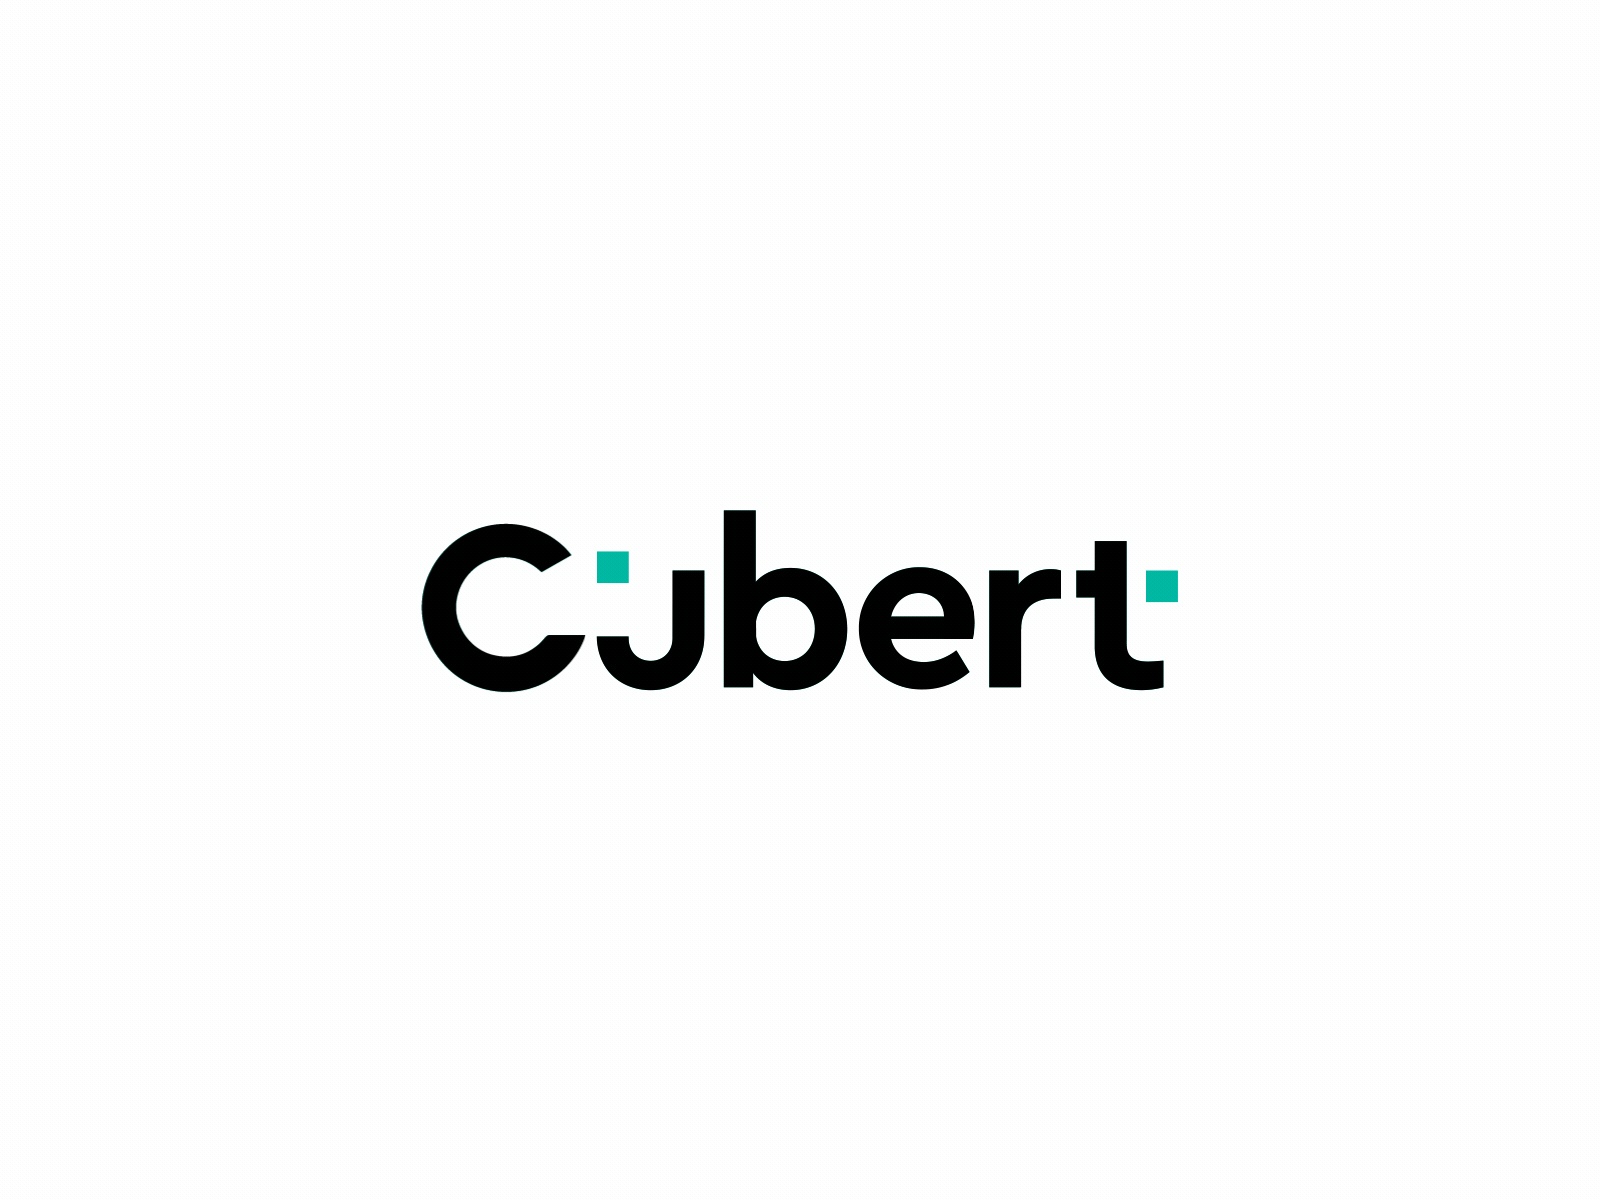 Dribbble - Cubert_logo_Drb.gif by Fede Cook